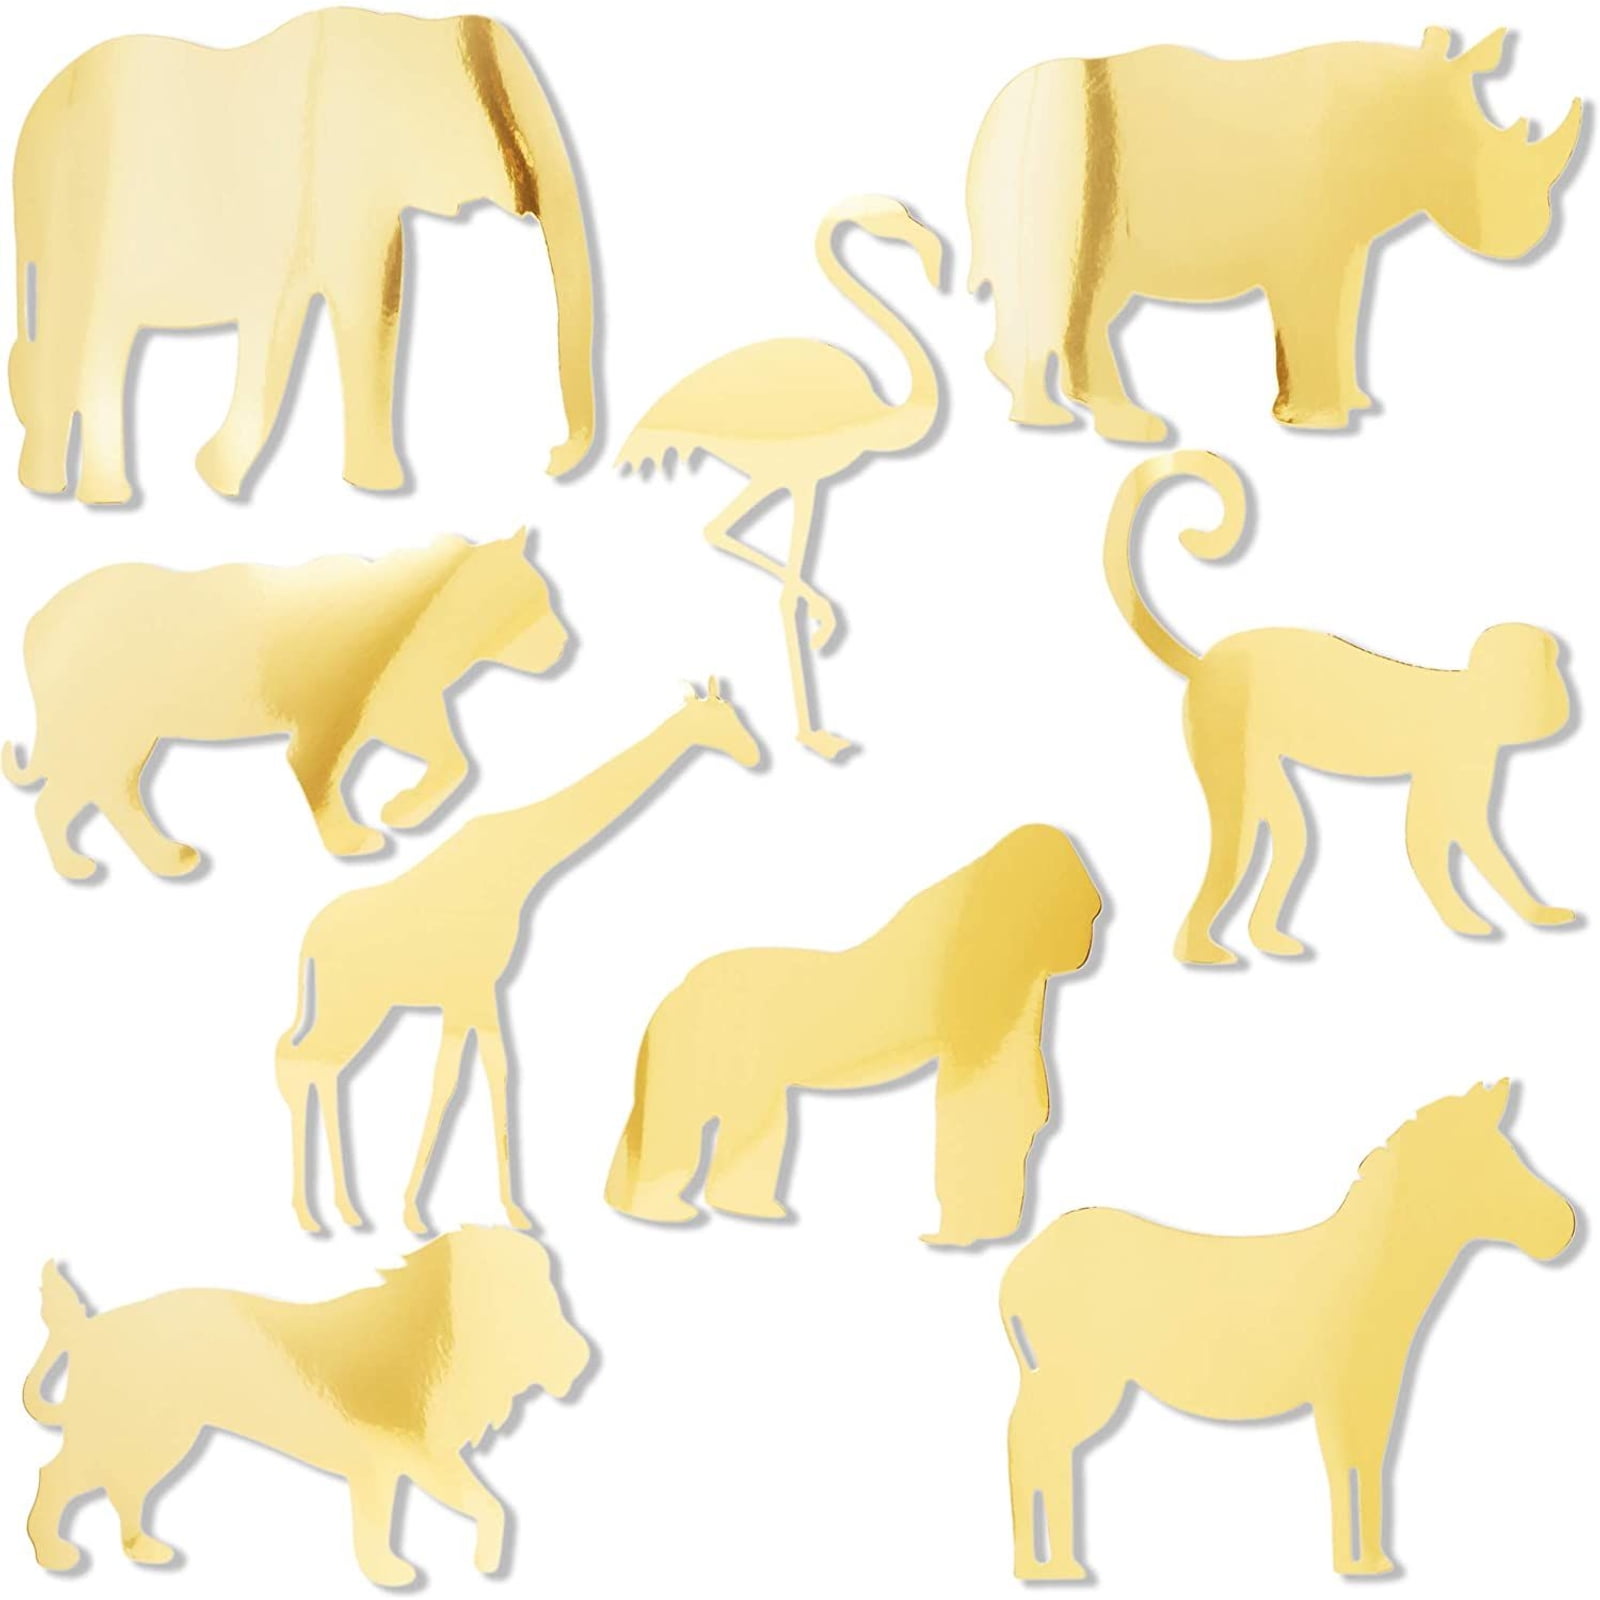 Zoo Animals Cutouts Safari Jungle Cut-Outs for Baby Shower Birthday Party 21 Count